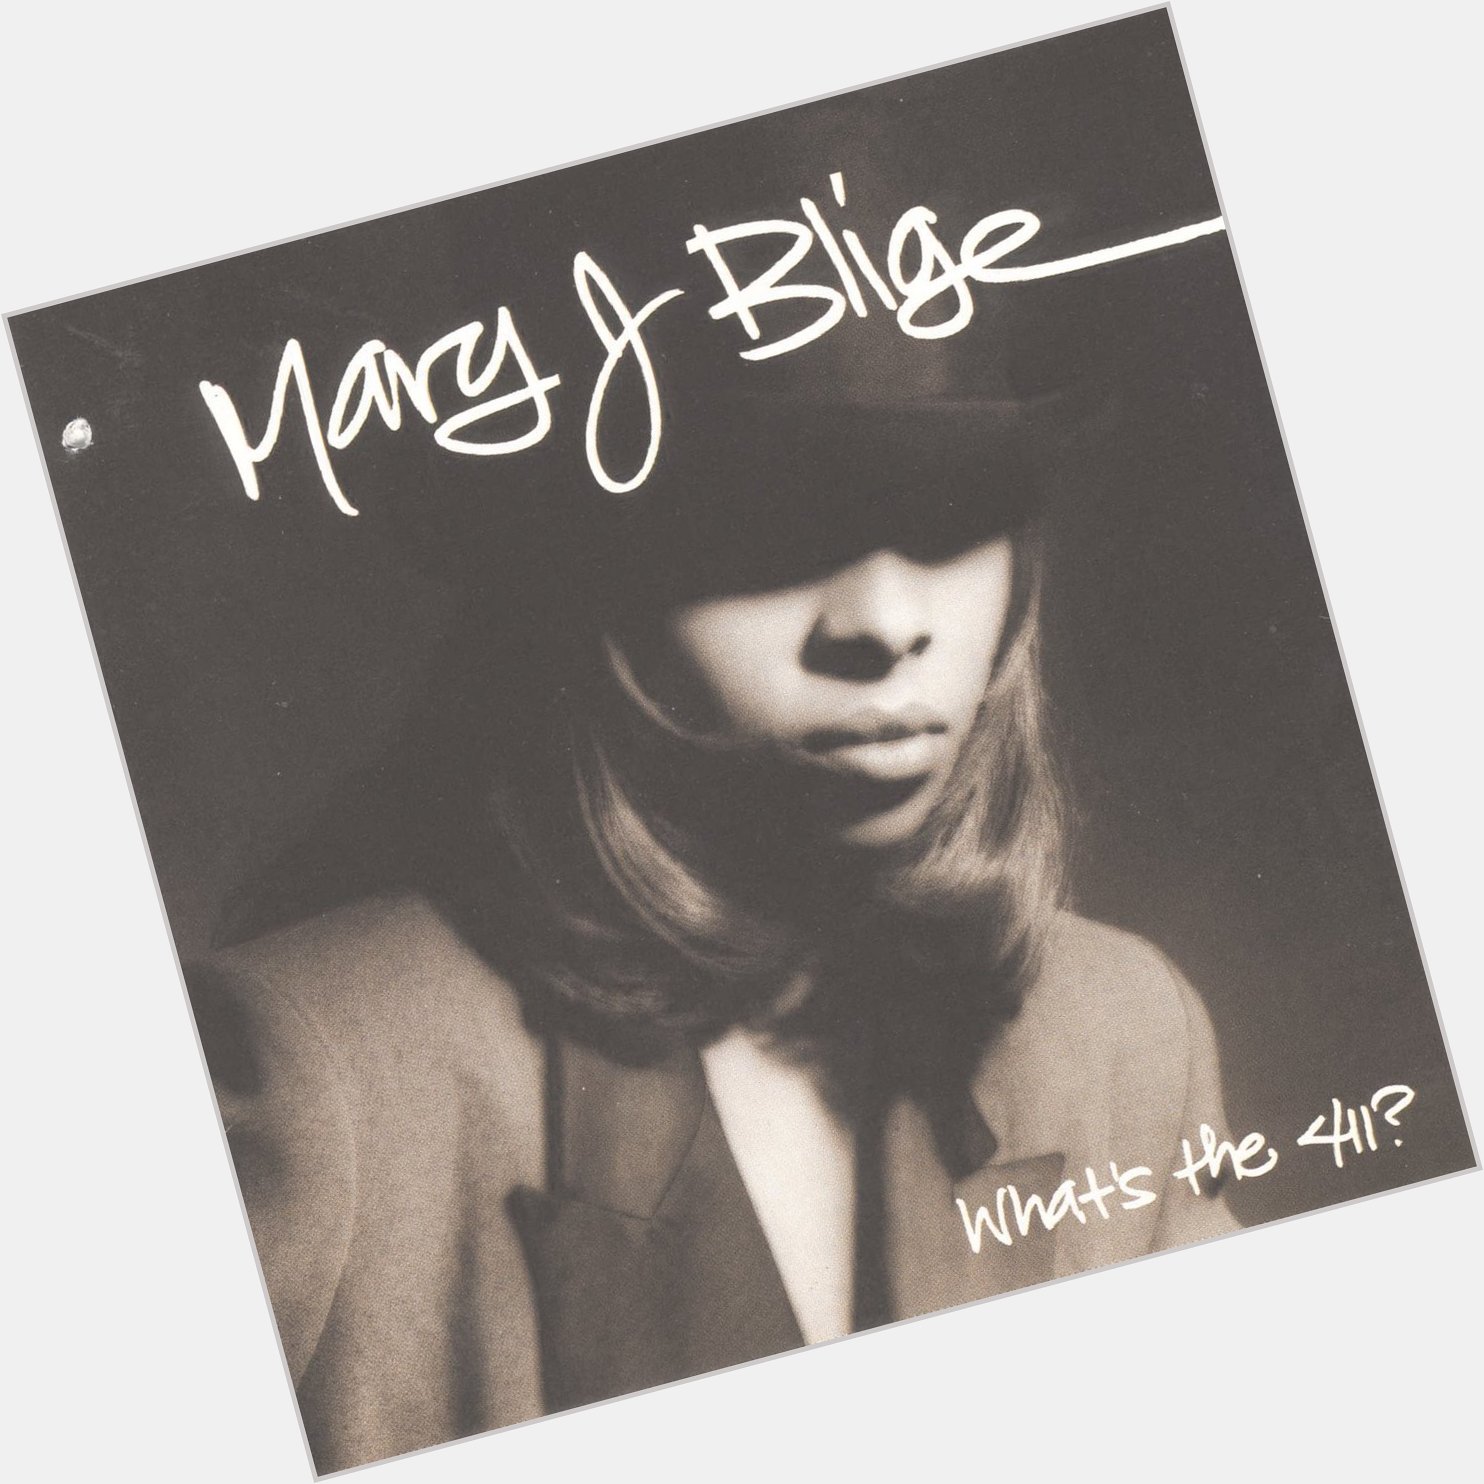 Happy Birthday to Mary J. Blige, one of the best R&B artists of all time who also gave us these amazing albums 